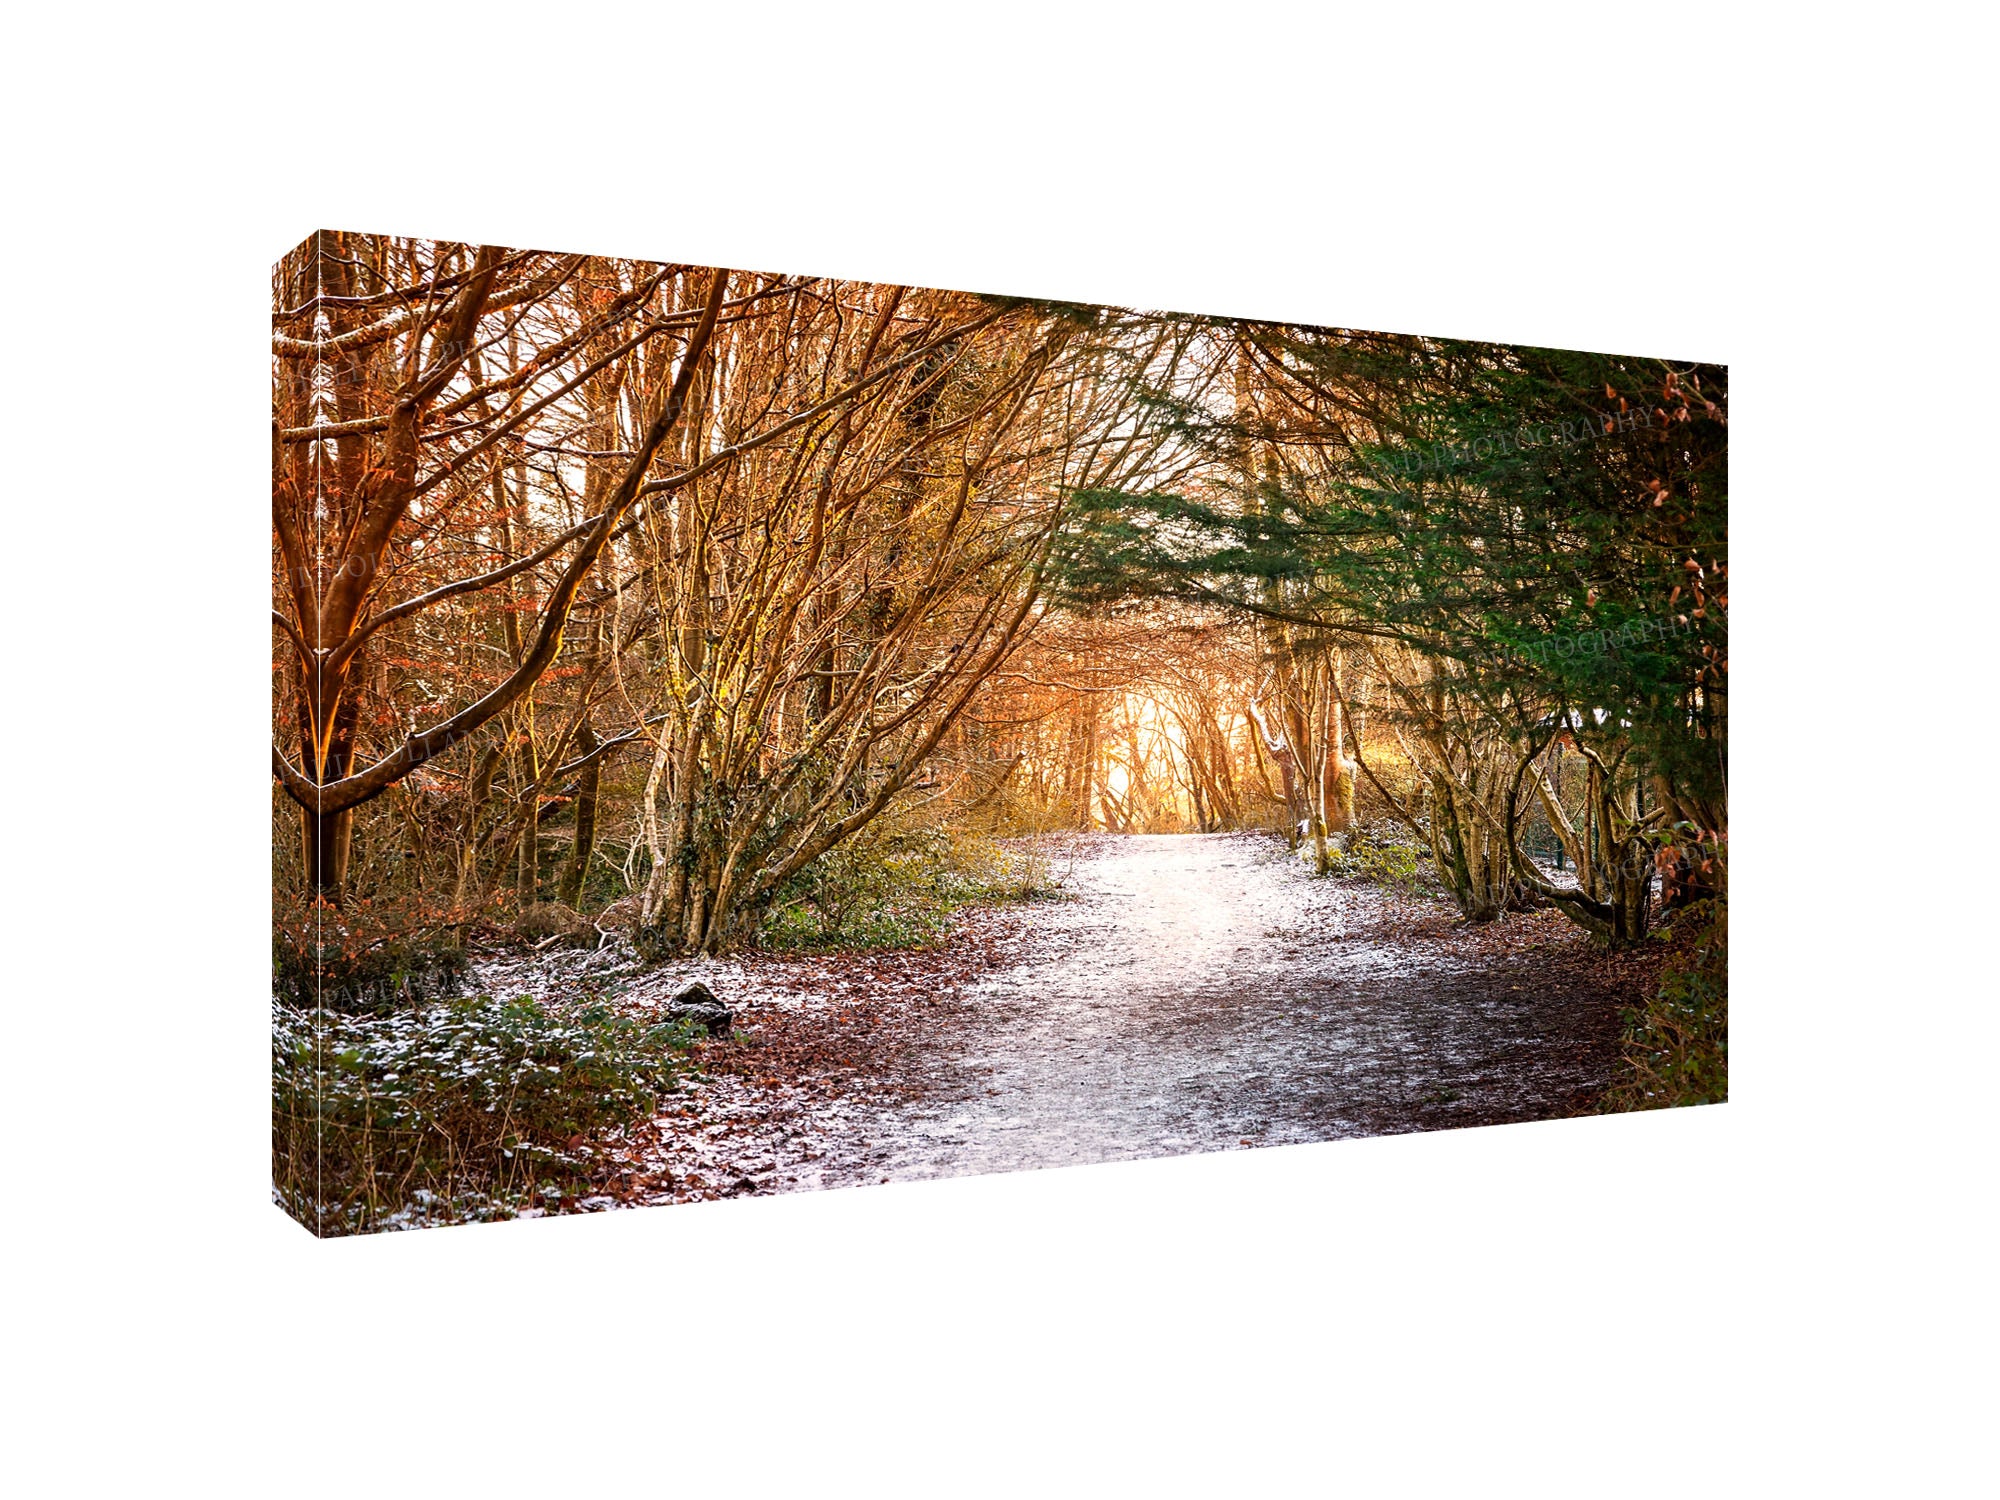 Snow in Scroggs Wood, Kendal - Wall Canvas